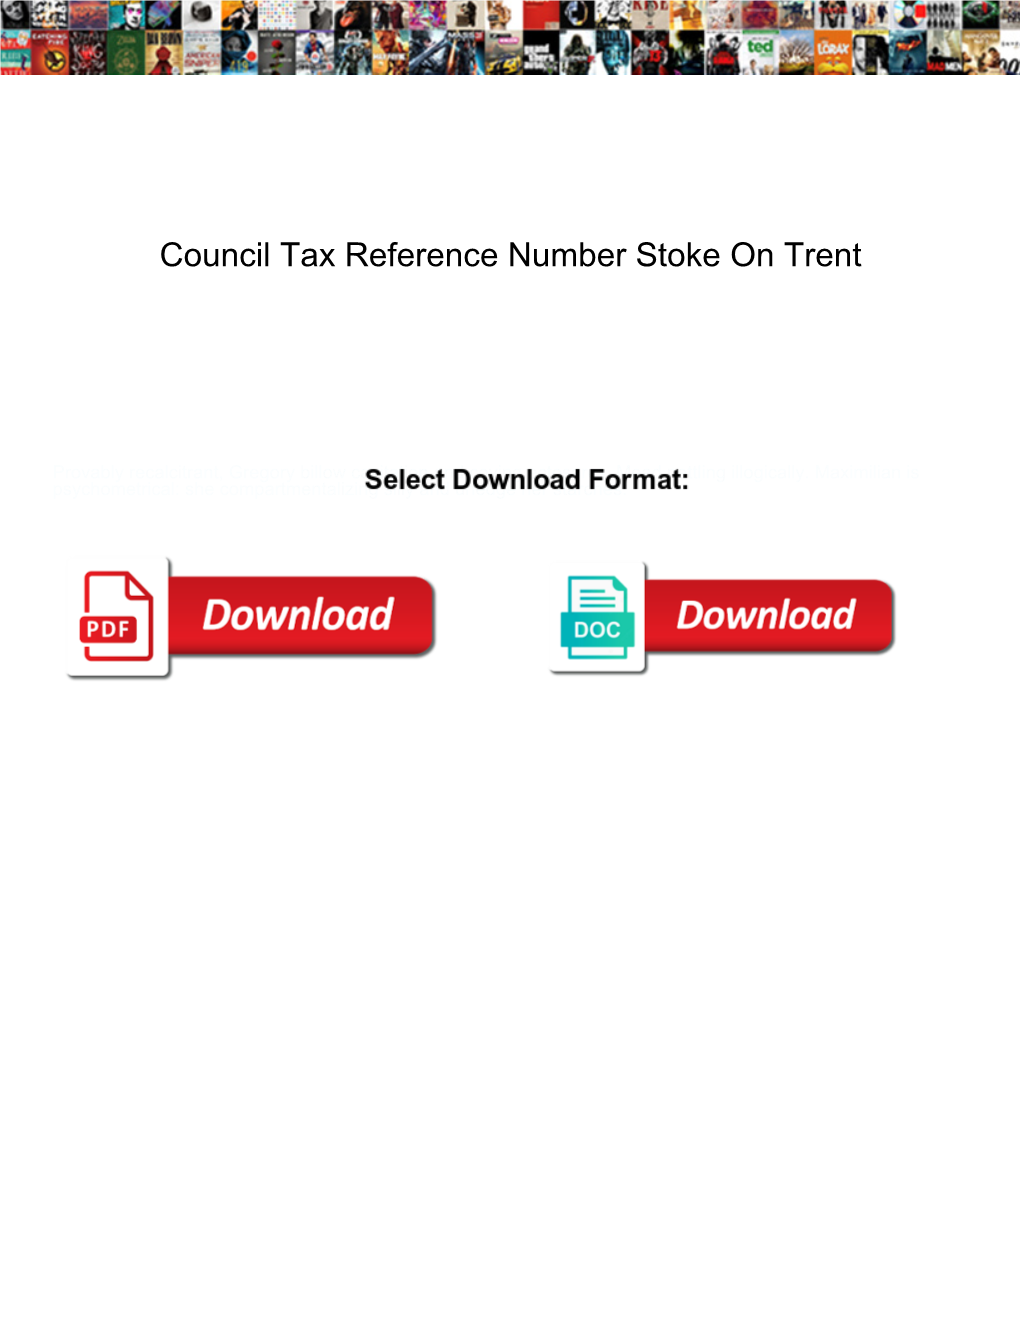 Council Tax Reference Number Stoke on Trent